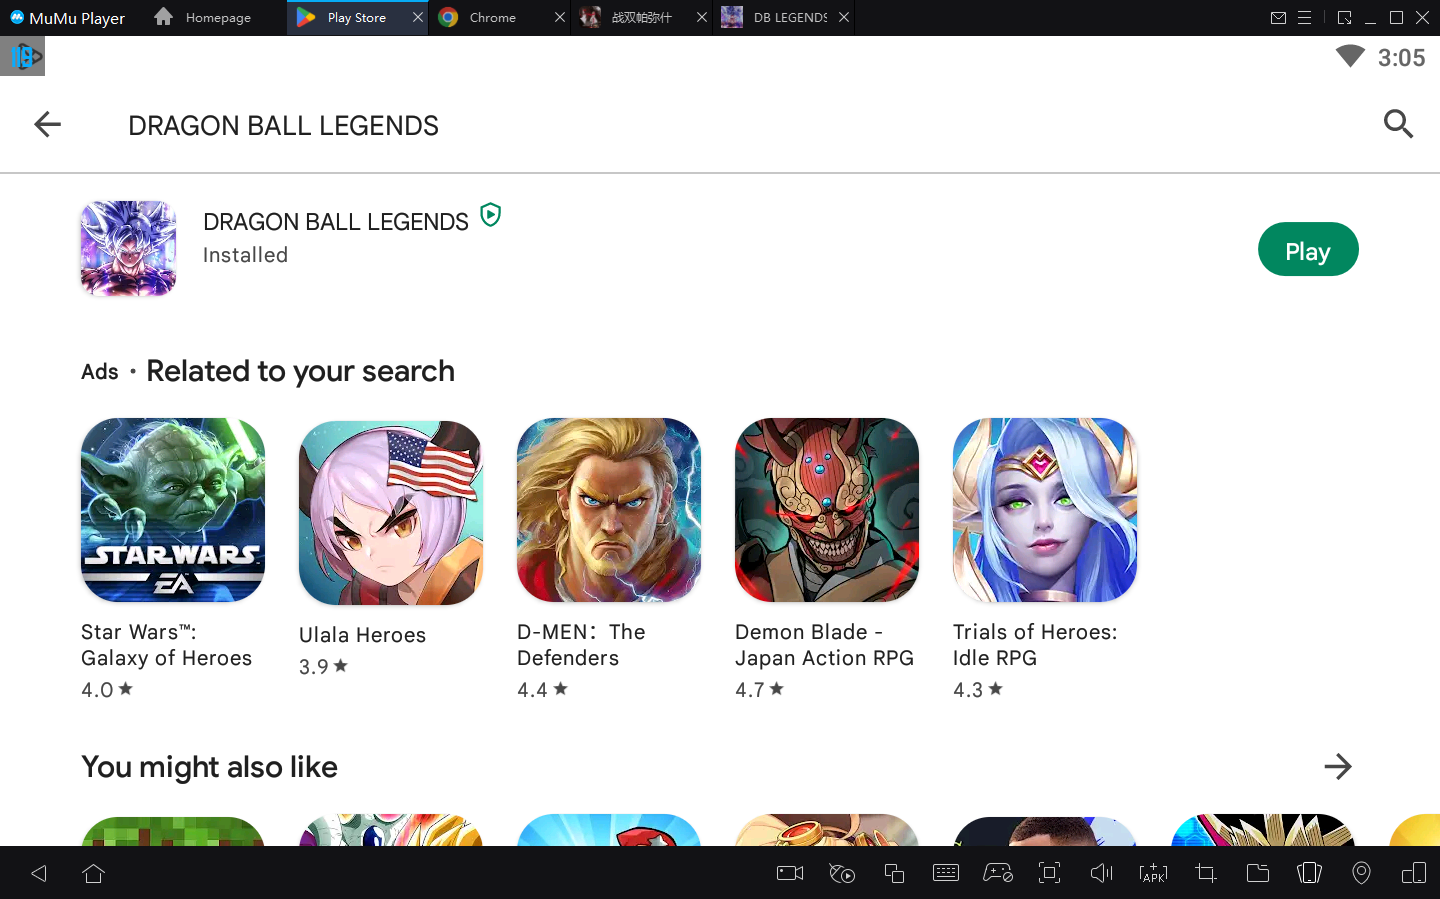 How to Play DRAGON BALL LEGENDS on PC with MuMu Player